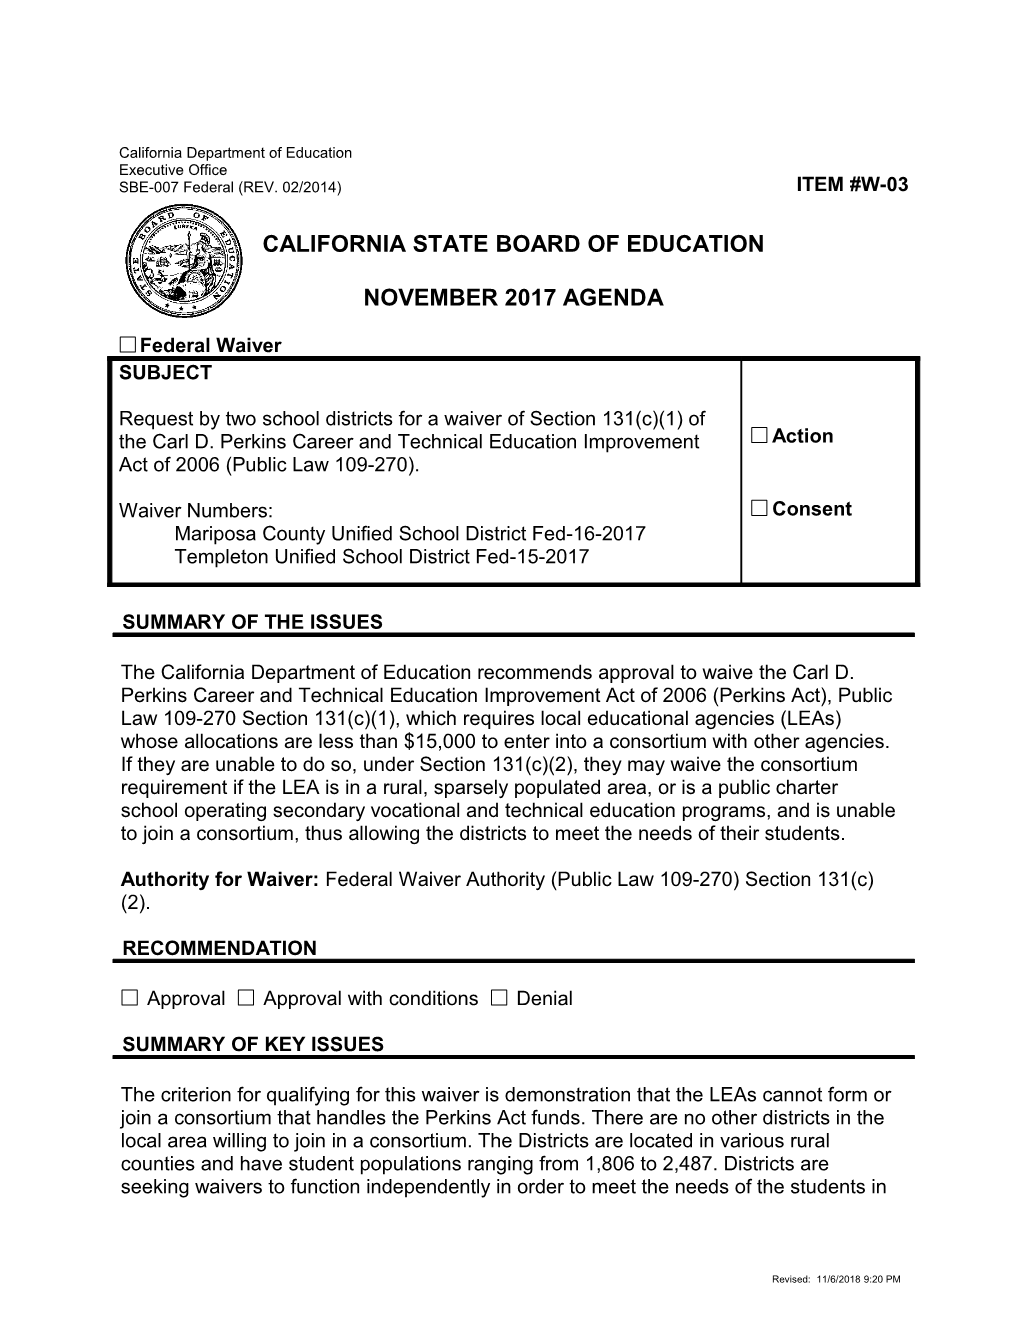 November 2017 Waiver Item W-03 - Meeting Agendas (CA State Board of Education)